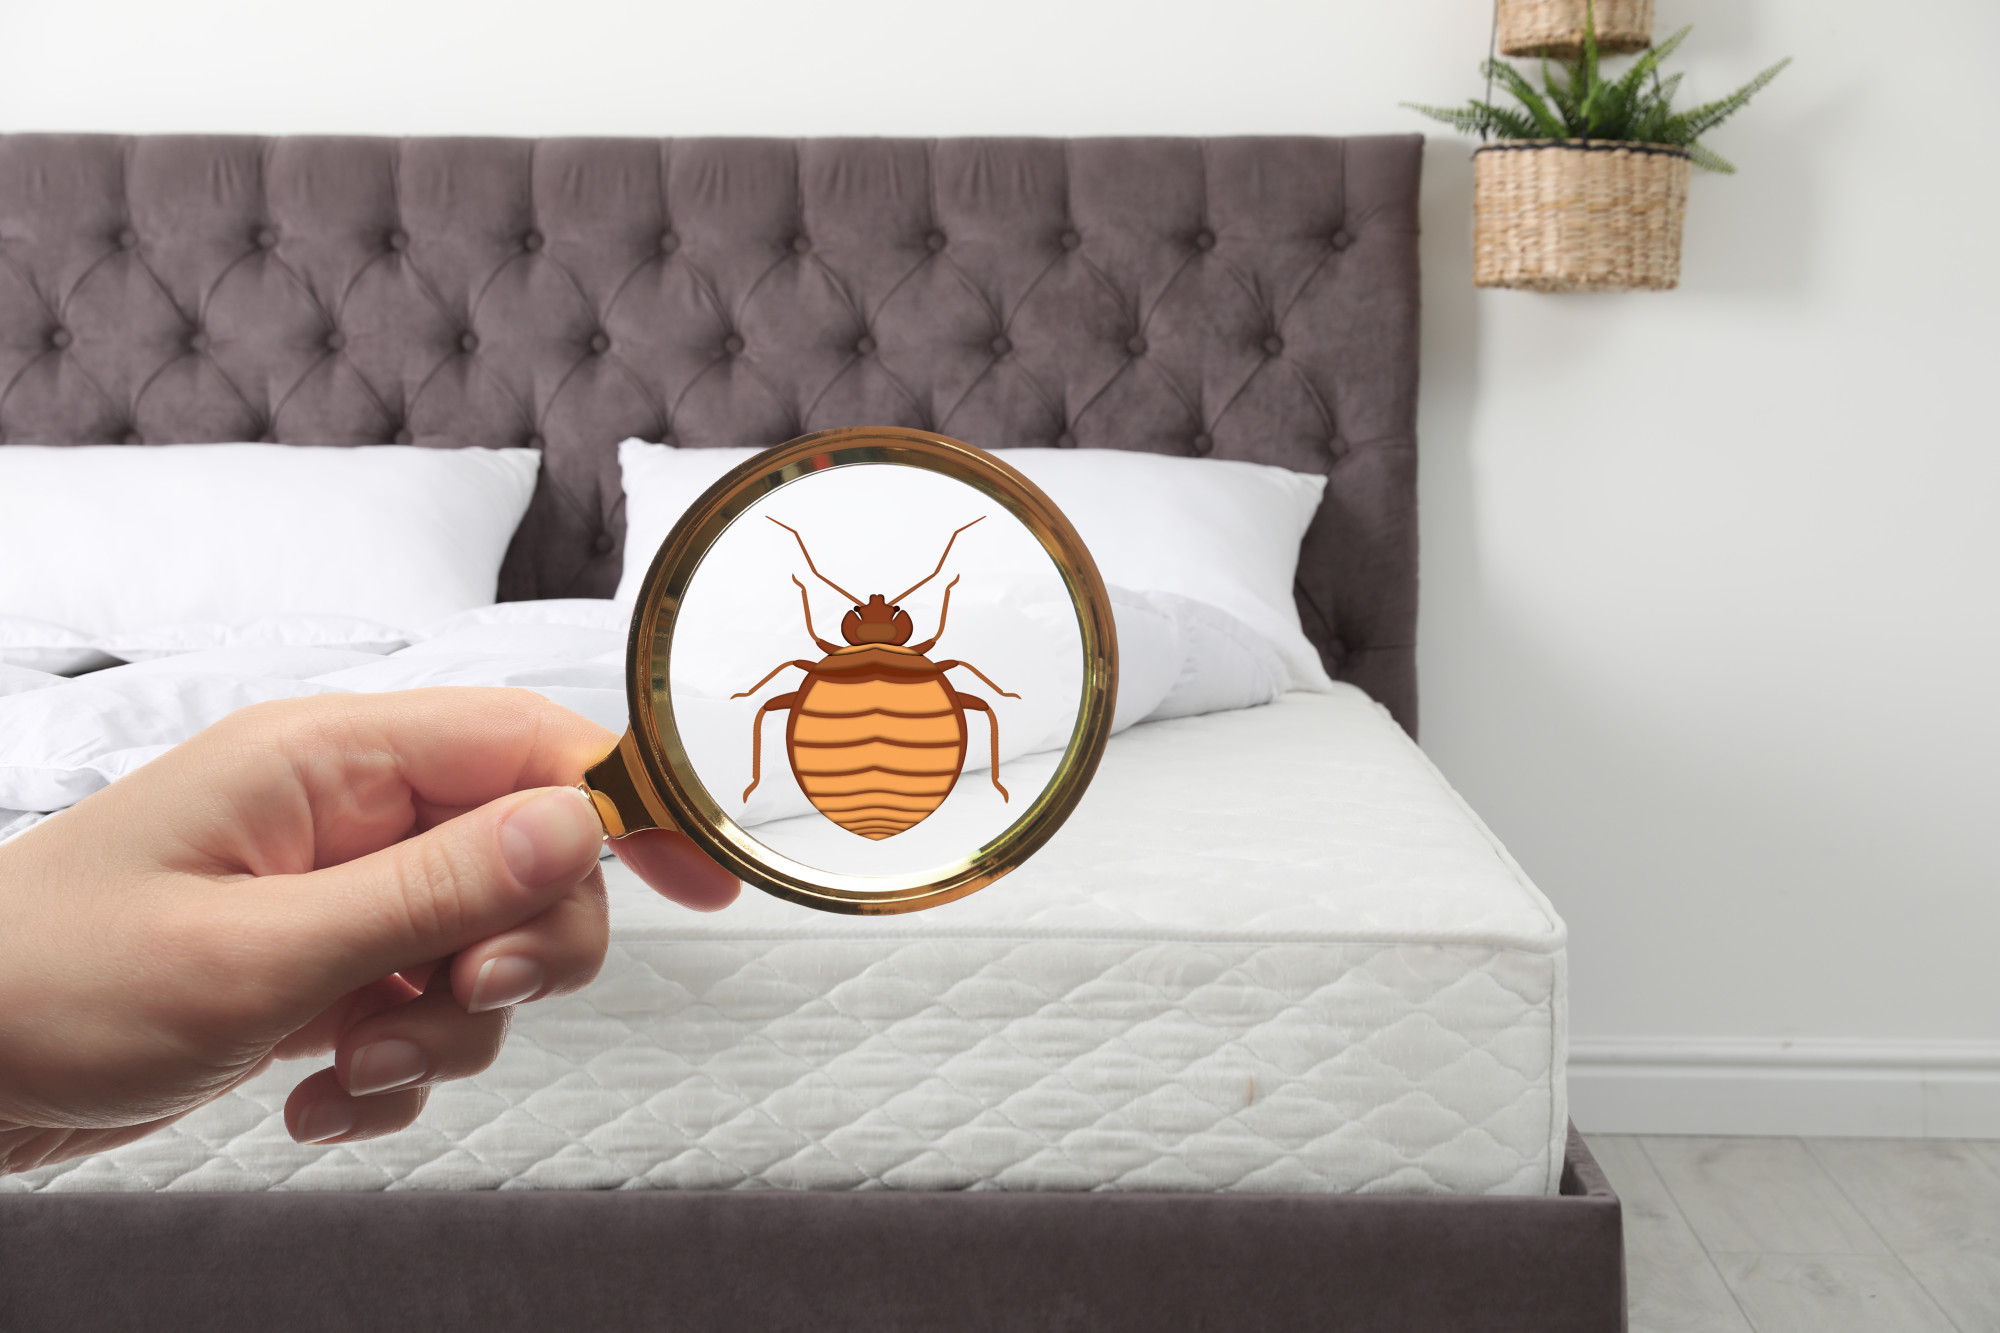 Getting rid of pests in your home properly requires knowing what not to do. Here are common mistakes with residential pest control and how to avoid them.